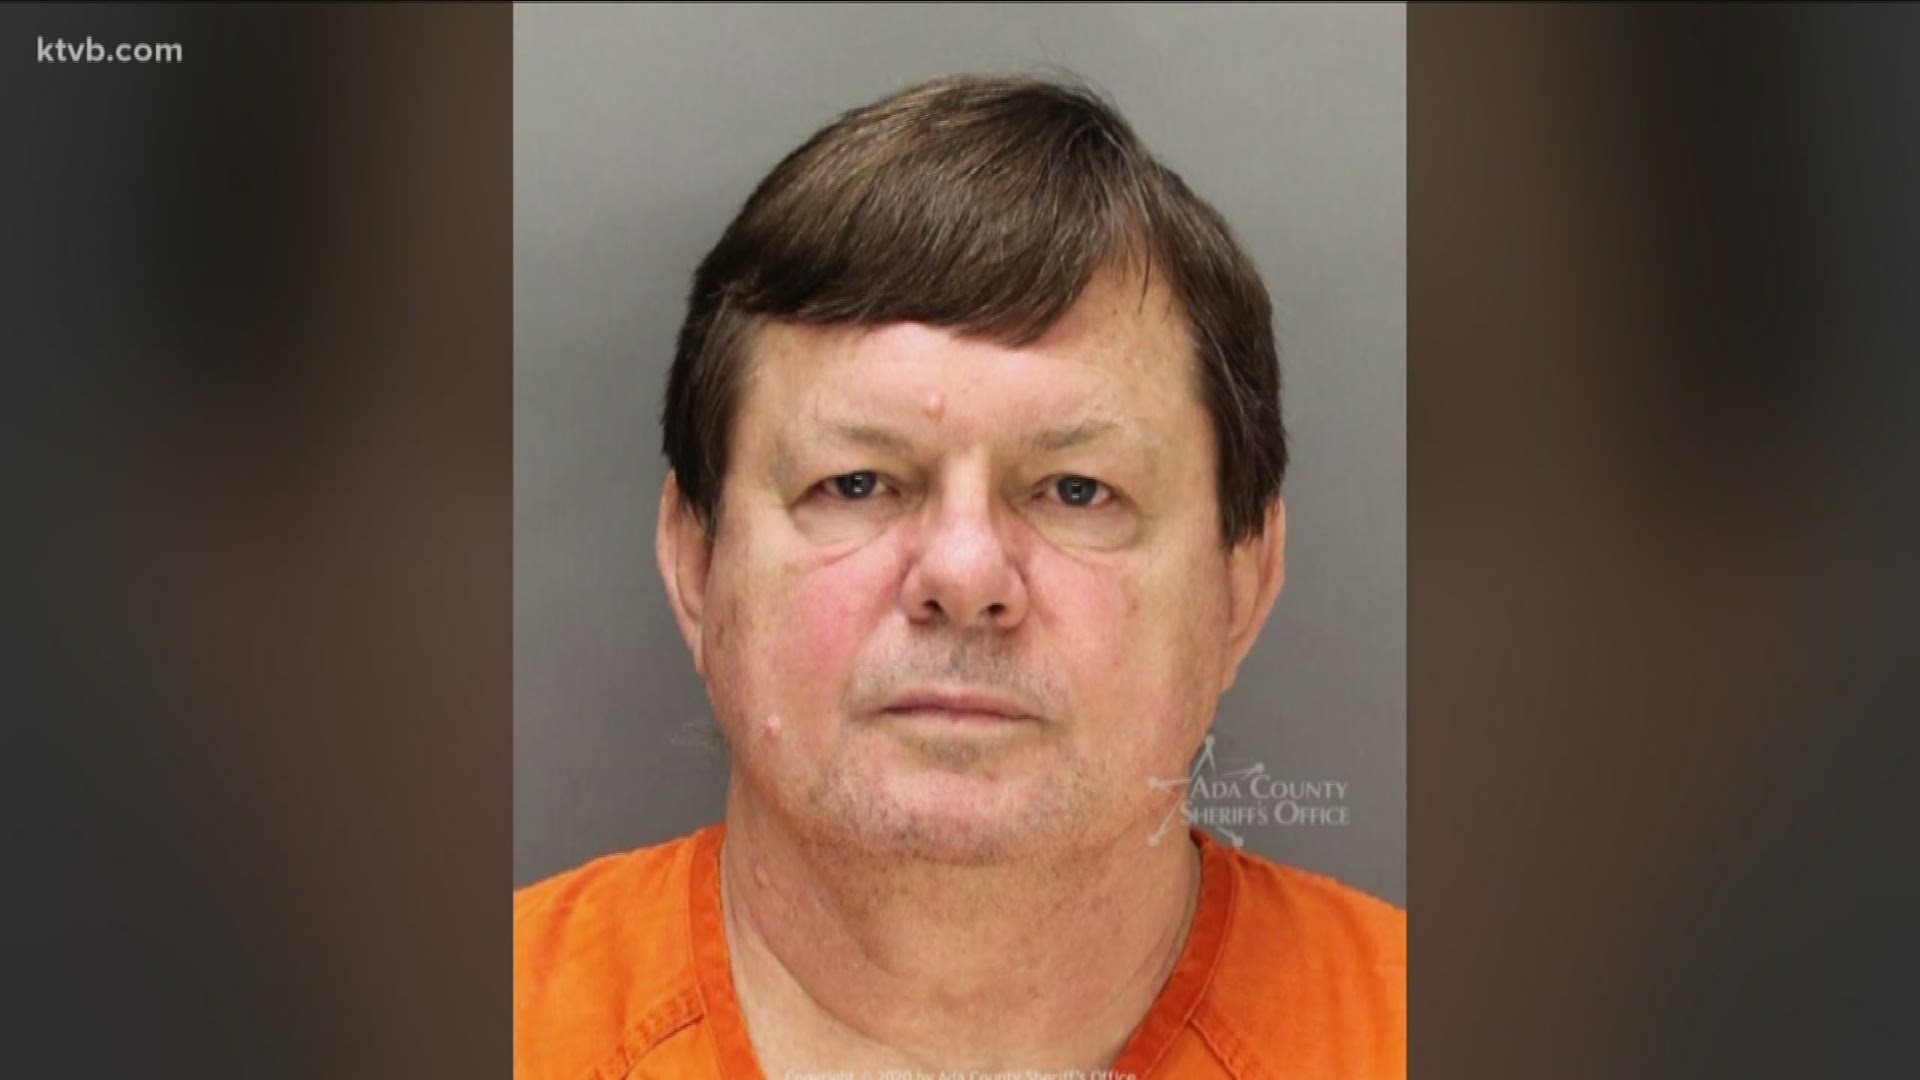 Officials said they found evidence that the 62-year-old man had repeatedly driven by elementary schools and watched children walk home.